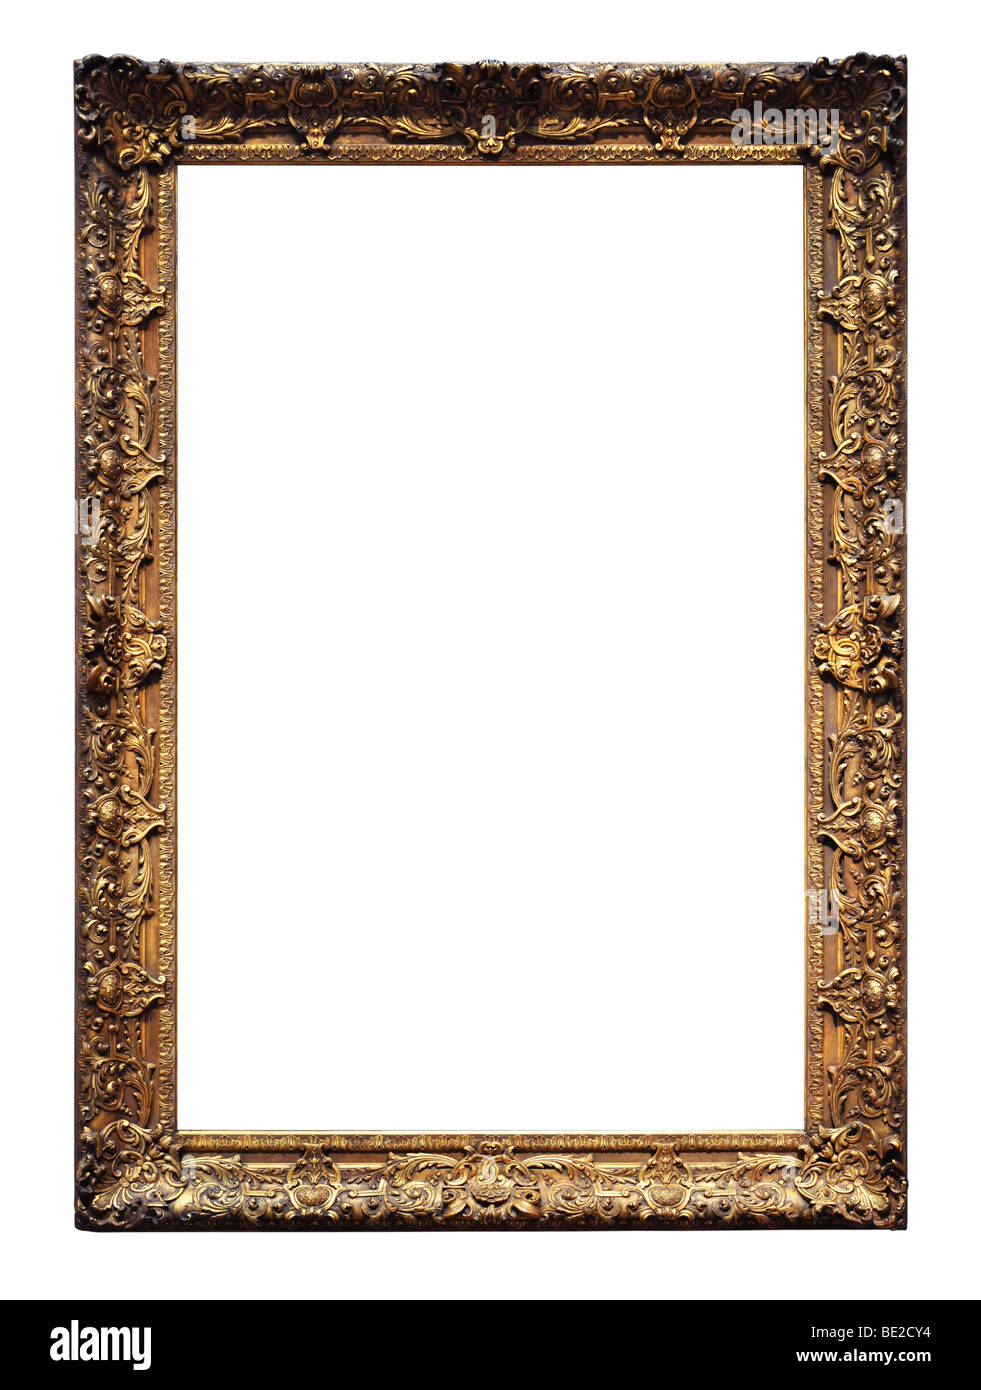 Vintage gold frame isolated over a white background Stock Photo